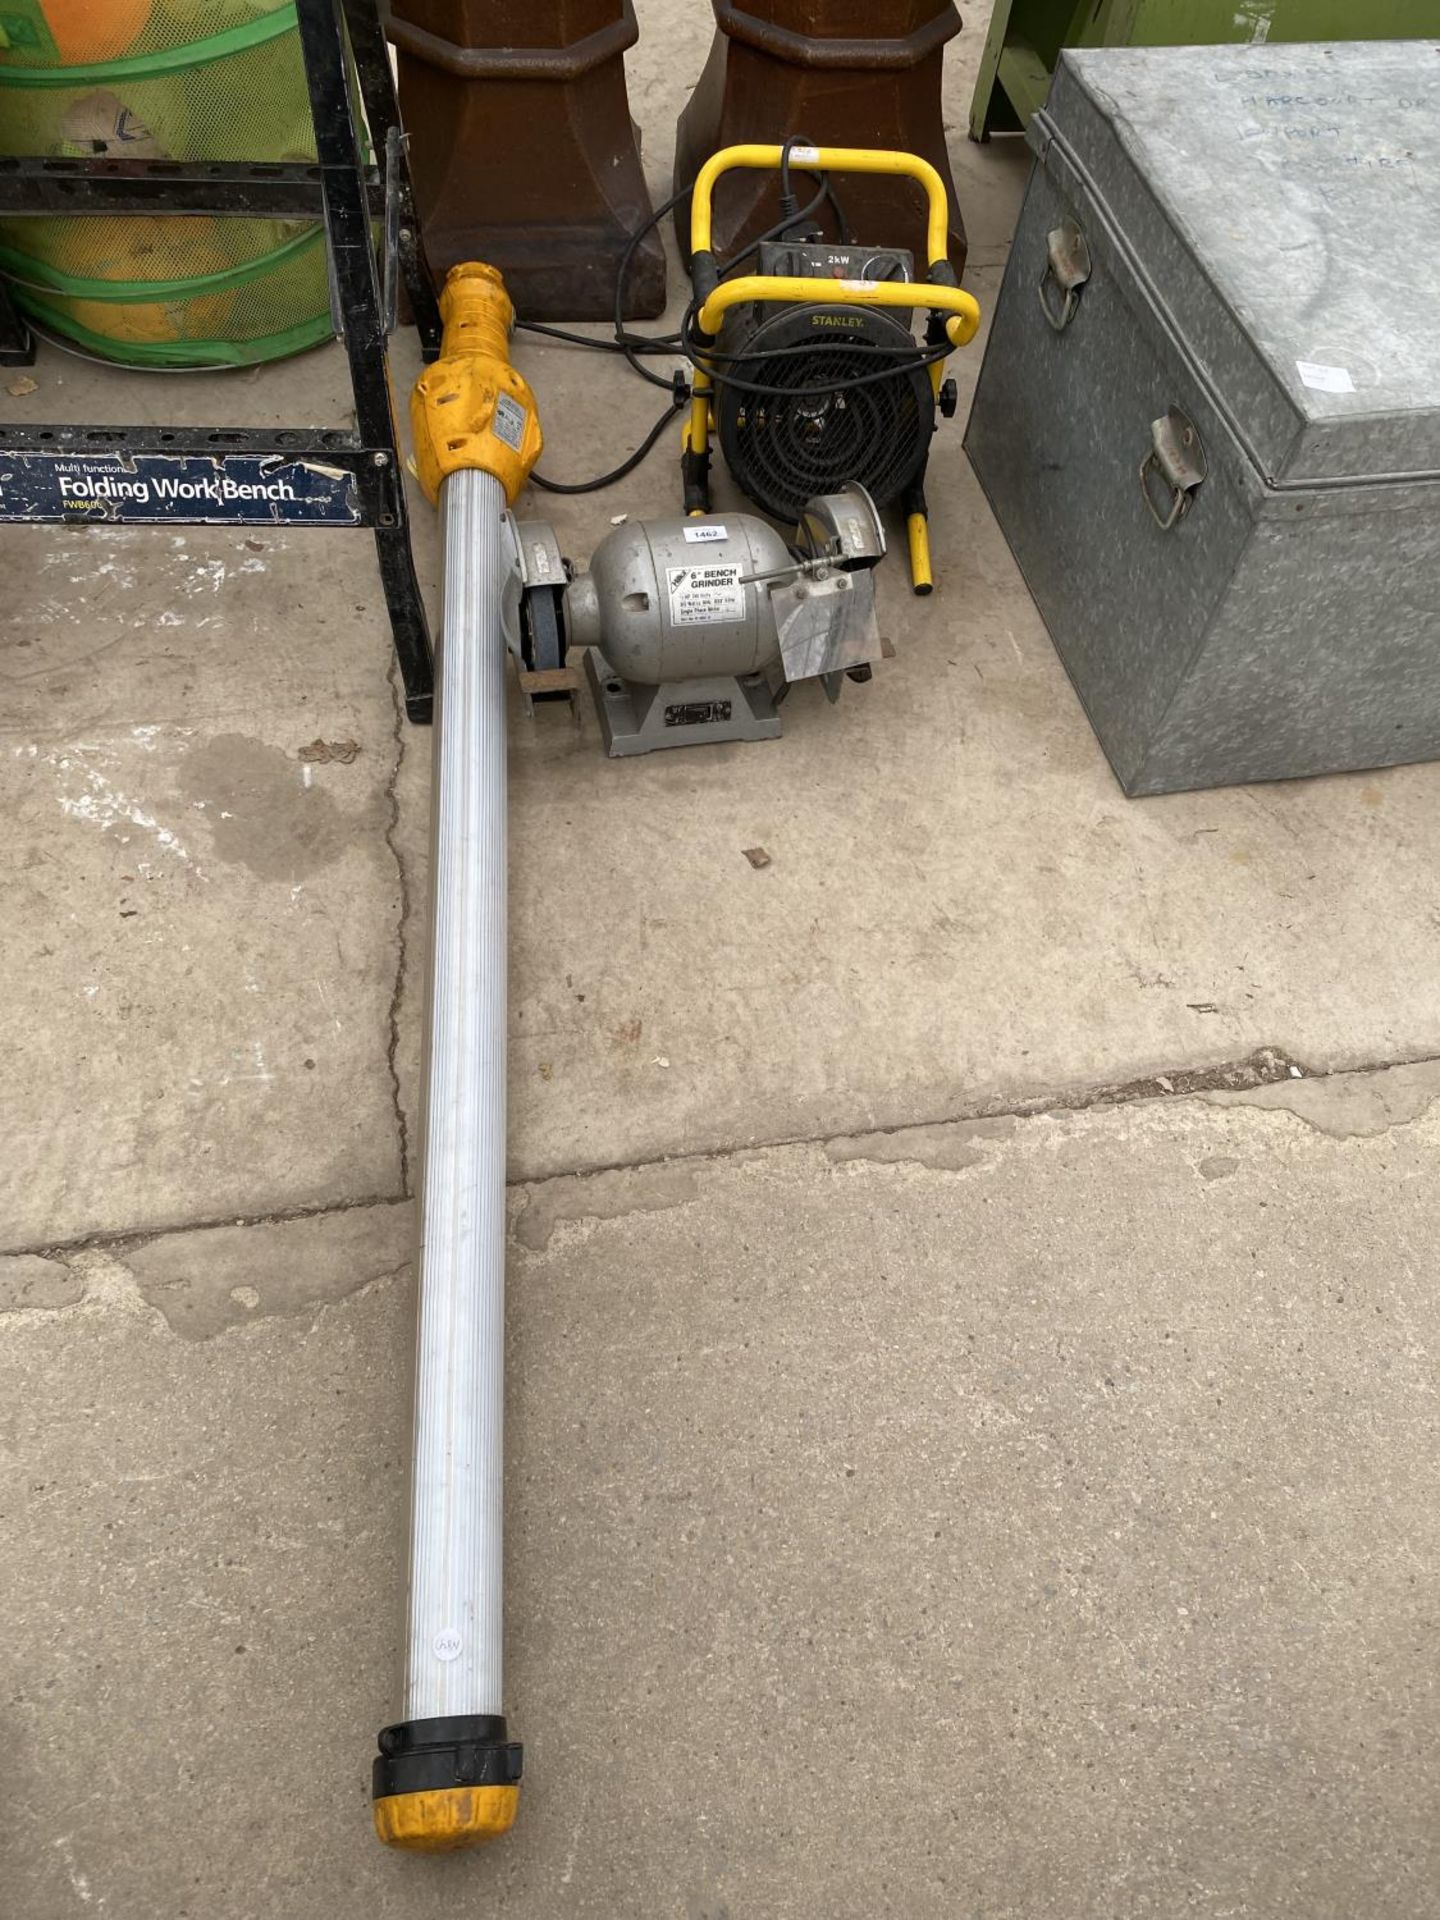 A HLKA 6" BENCH GRINDER, A STANLEY HEATER AND A WORK LIGHT